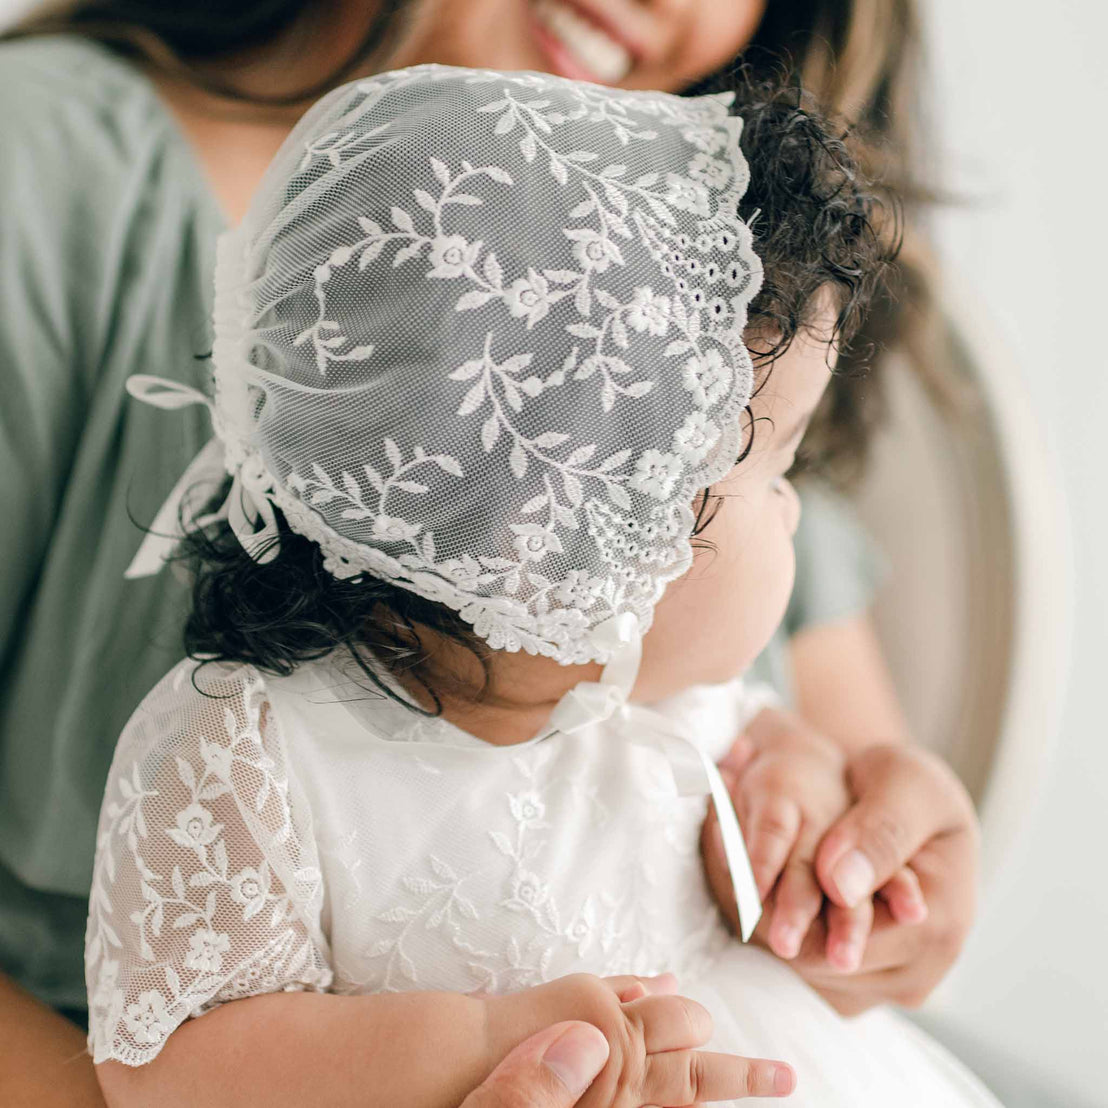 A baby wearing an Ella Lace Bonnet and dress is held by an adult dressed in a green top. The baby faces away from the camera, showing intricate details of the floral embroidered netting lace on the bonnet and gown. The adult's face is partially visible in the background, smiling.